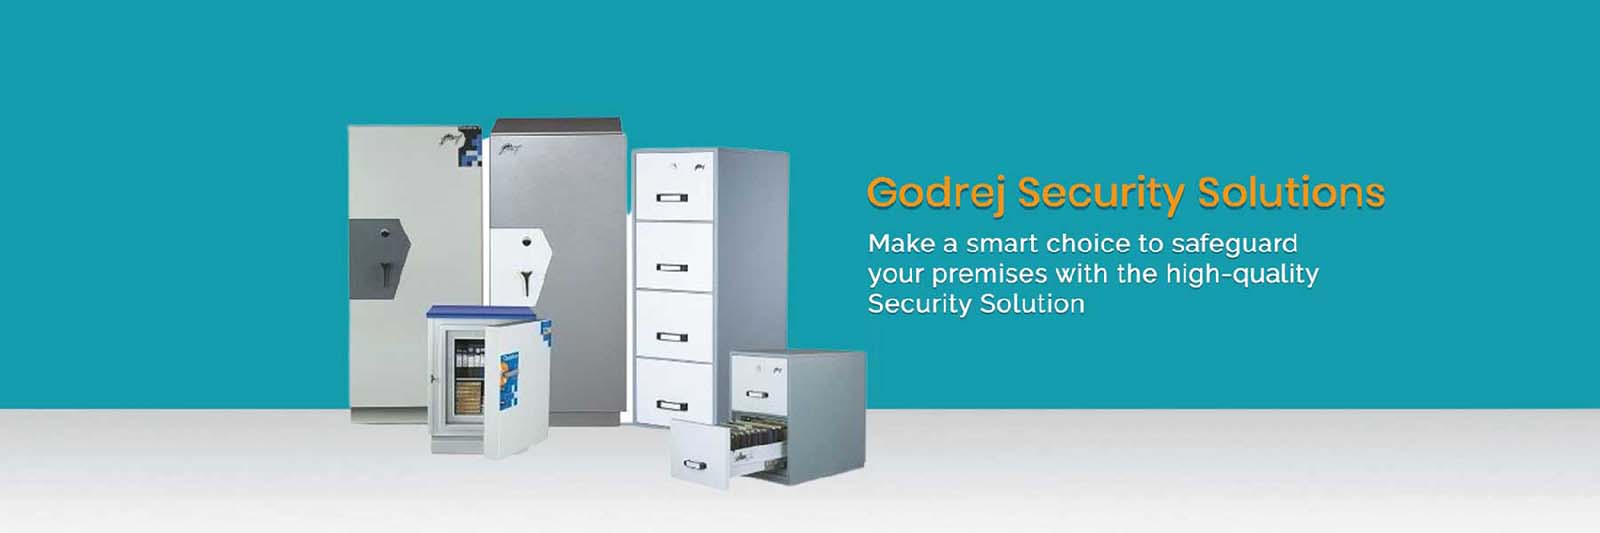 Godrej Security Solutions in Faridabad Sector 15a